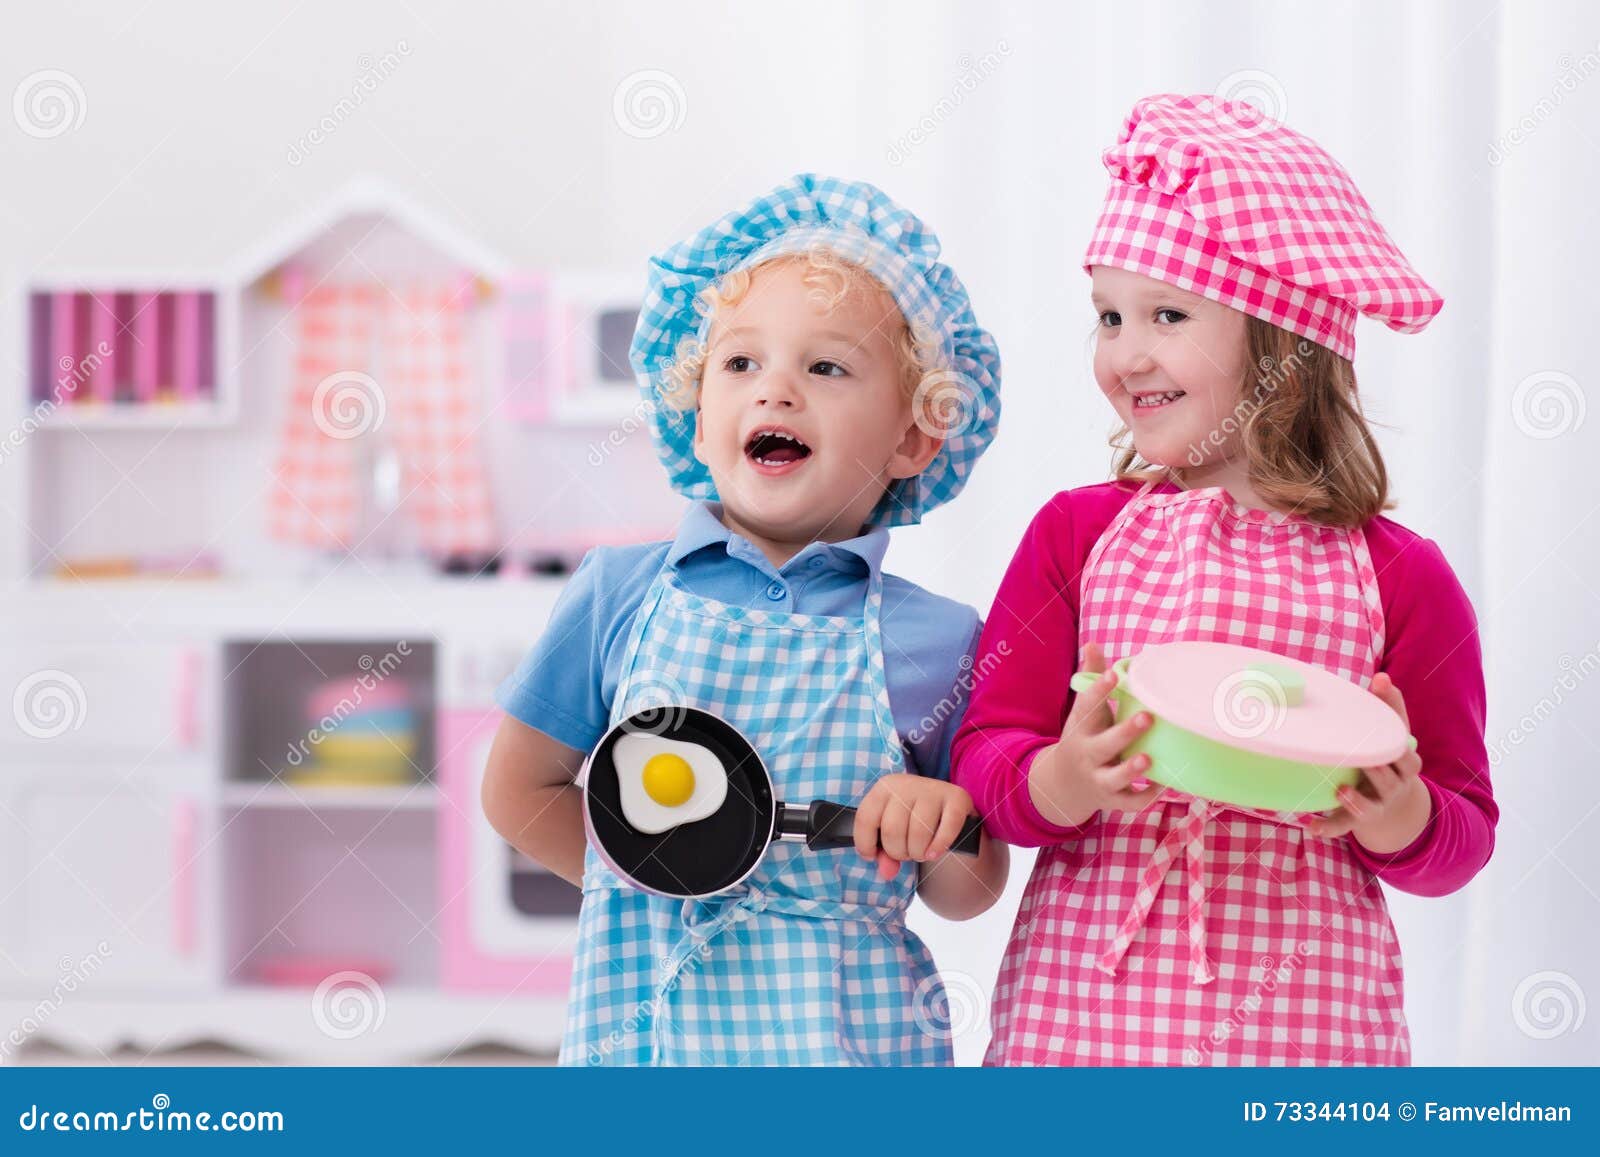 Kids Playing with Toy Kitchen Stock Photo - Image of preschooler, play: 73344104